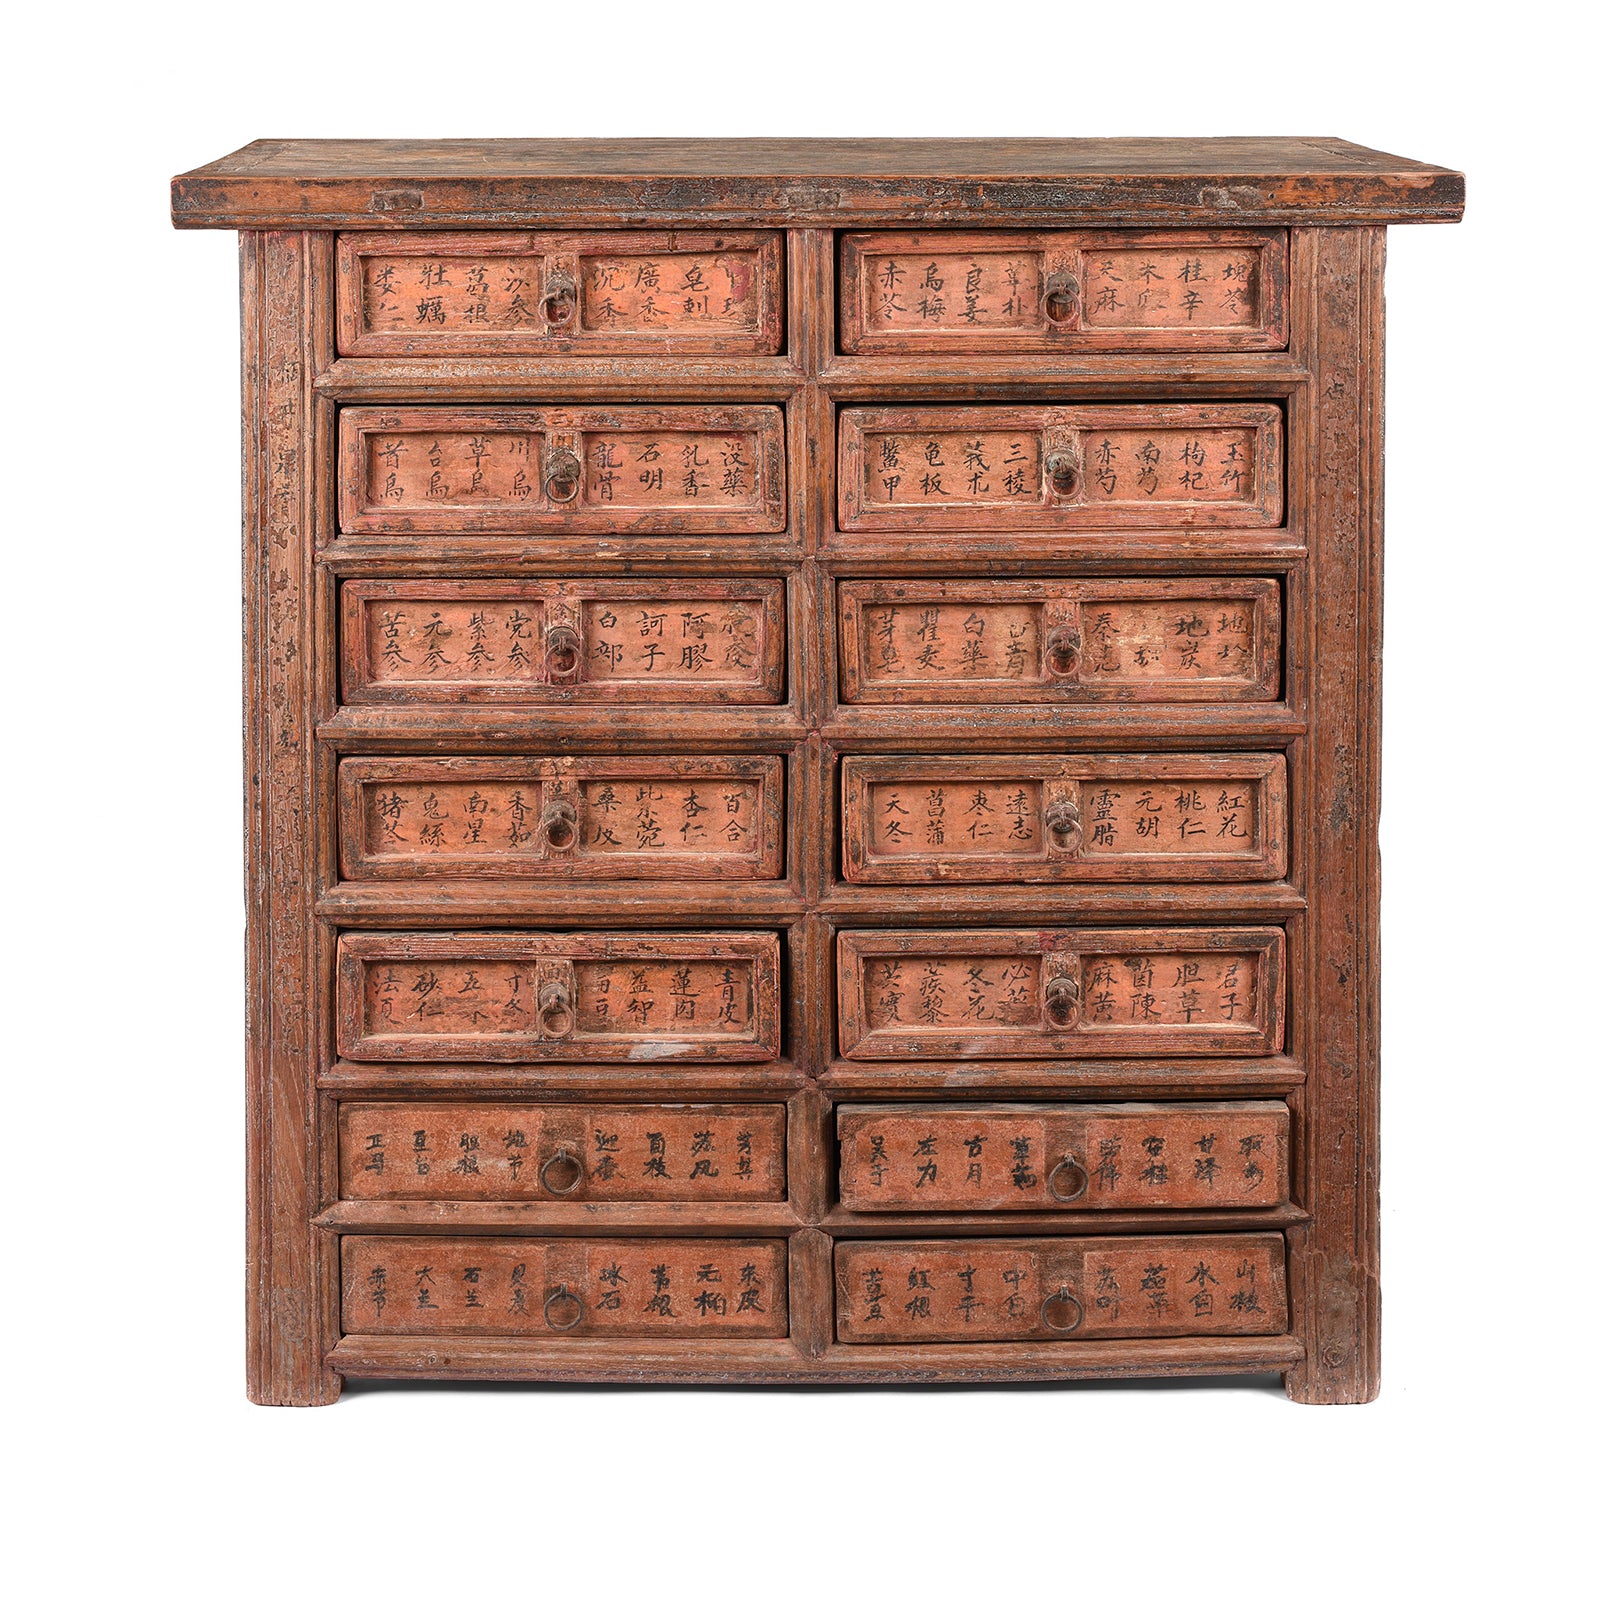 Antique Chinese Painted Apothecary Chest From Shanxi Province In Front of Chinese Screens | Indigo Antiques